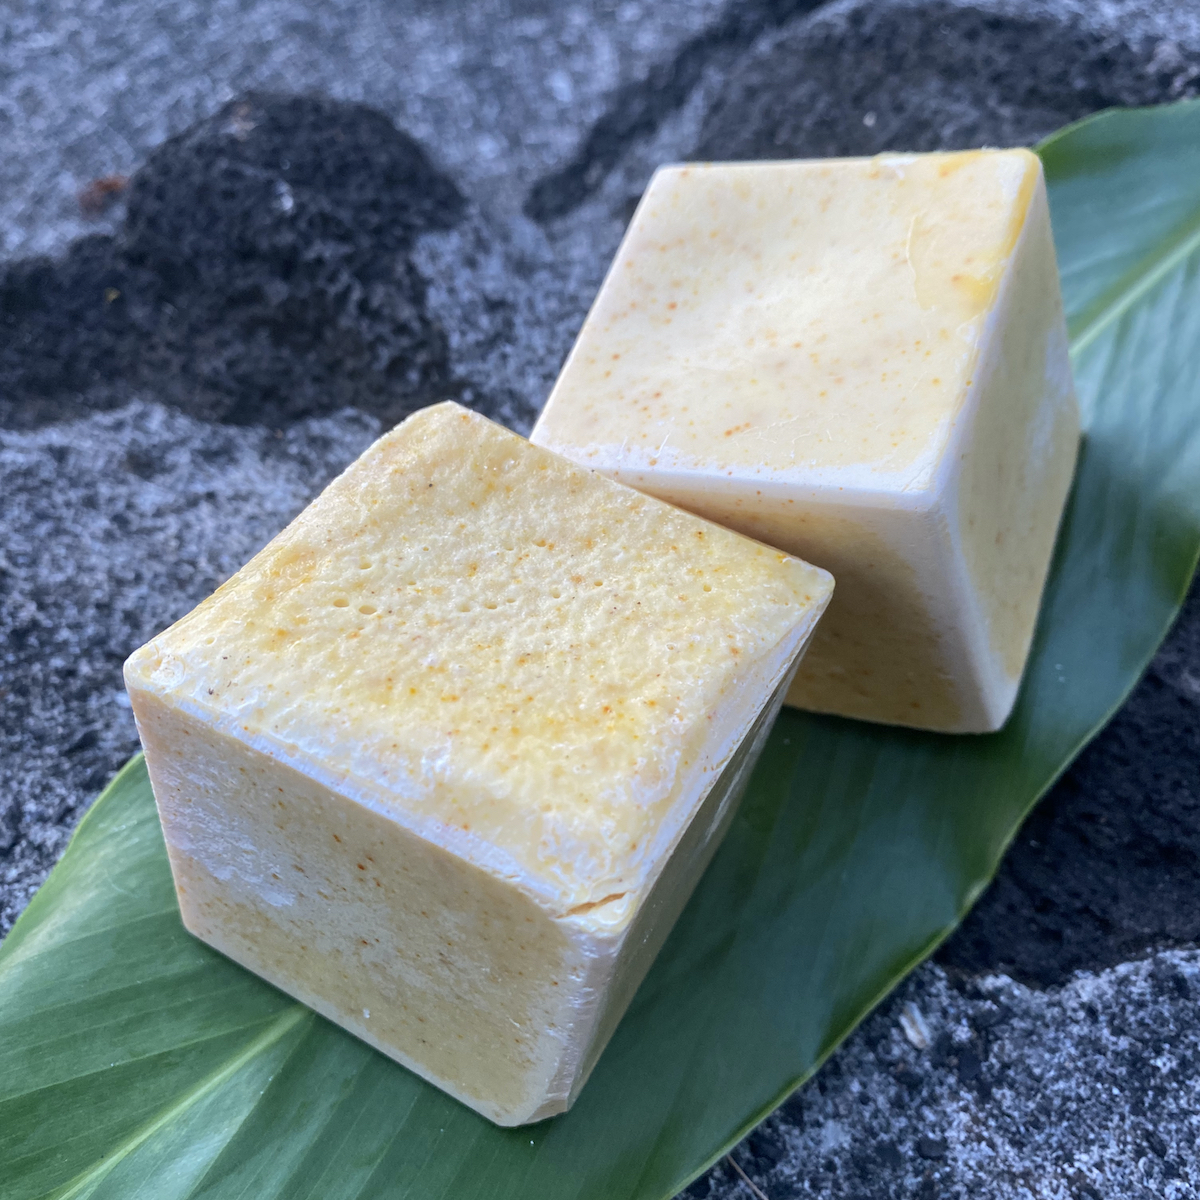 How to Remove Soda Ash from Homemade Soap?